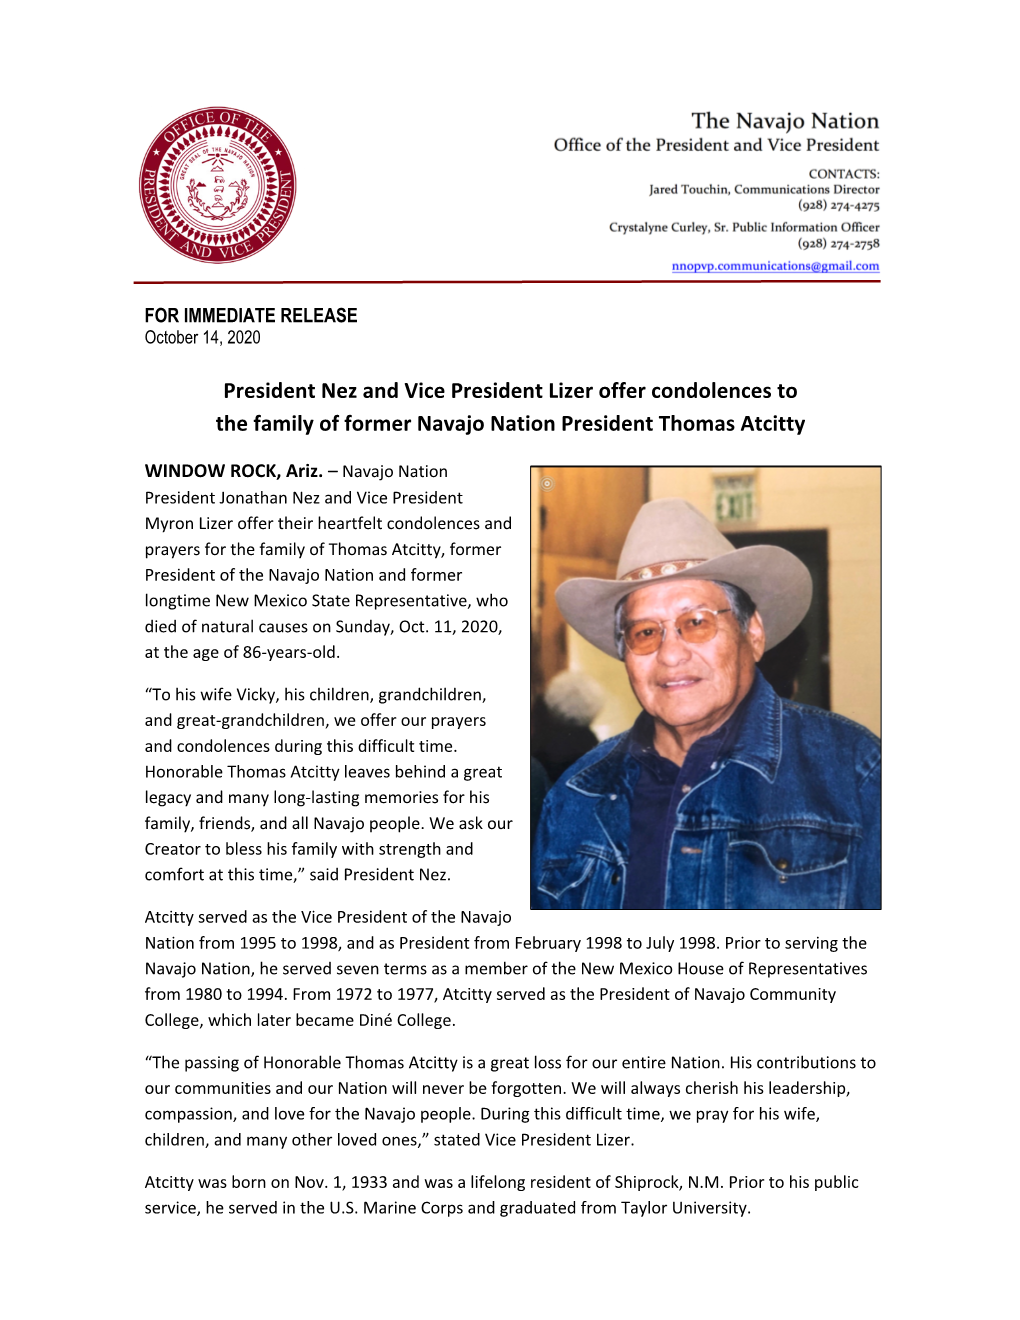 President Nez and Vice President Lizer Offer Condolences to the Family of Former Navajo Nation President Thomas Atcitty